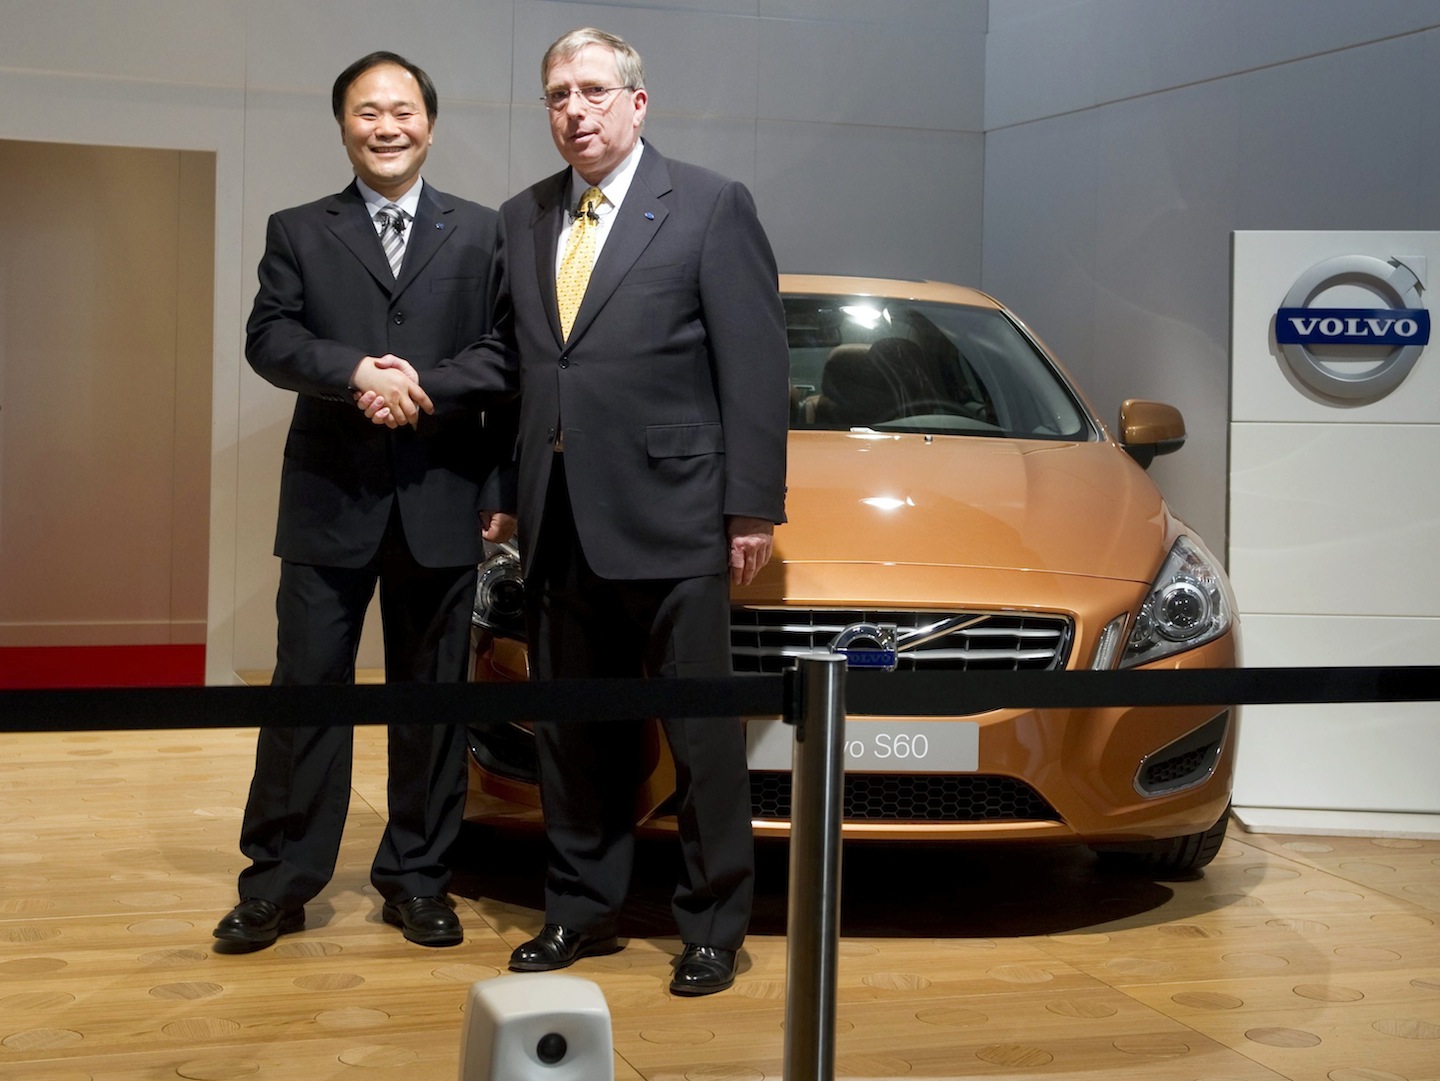 Chairman of Zhejiang Geely Holding Group Li Shufu (left) and former Executive Vice President and Chief Financial Officer of Ford Lewis Booth shake hands in front of a Volvo S60 in Torslanda, Gothenburg. Volvo Car Group plans to export a Chinese-made midsize sedan in 2015 to the US. – Reuters pic, January 11, 2015.